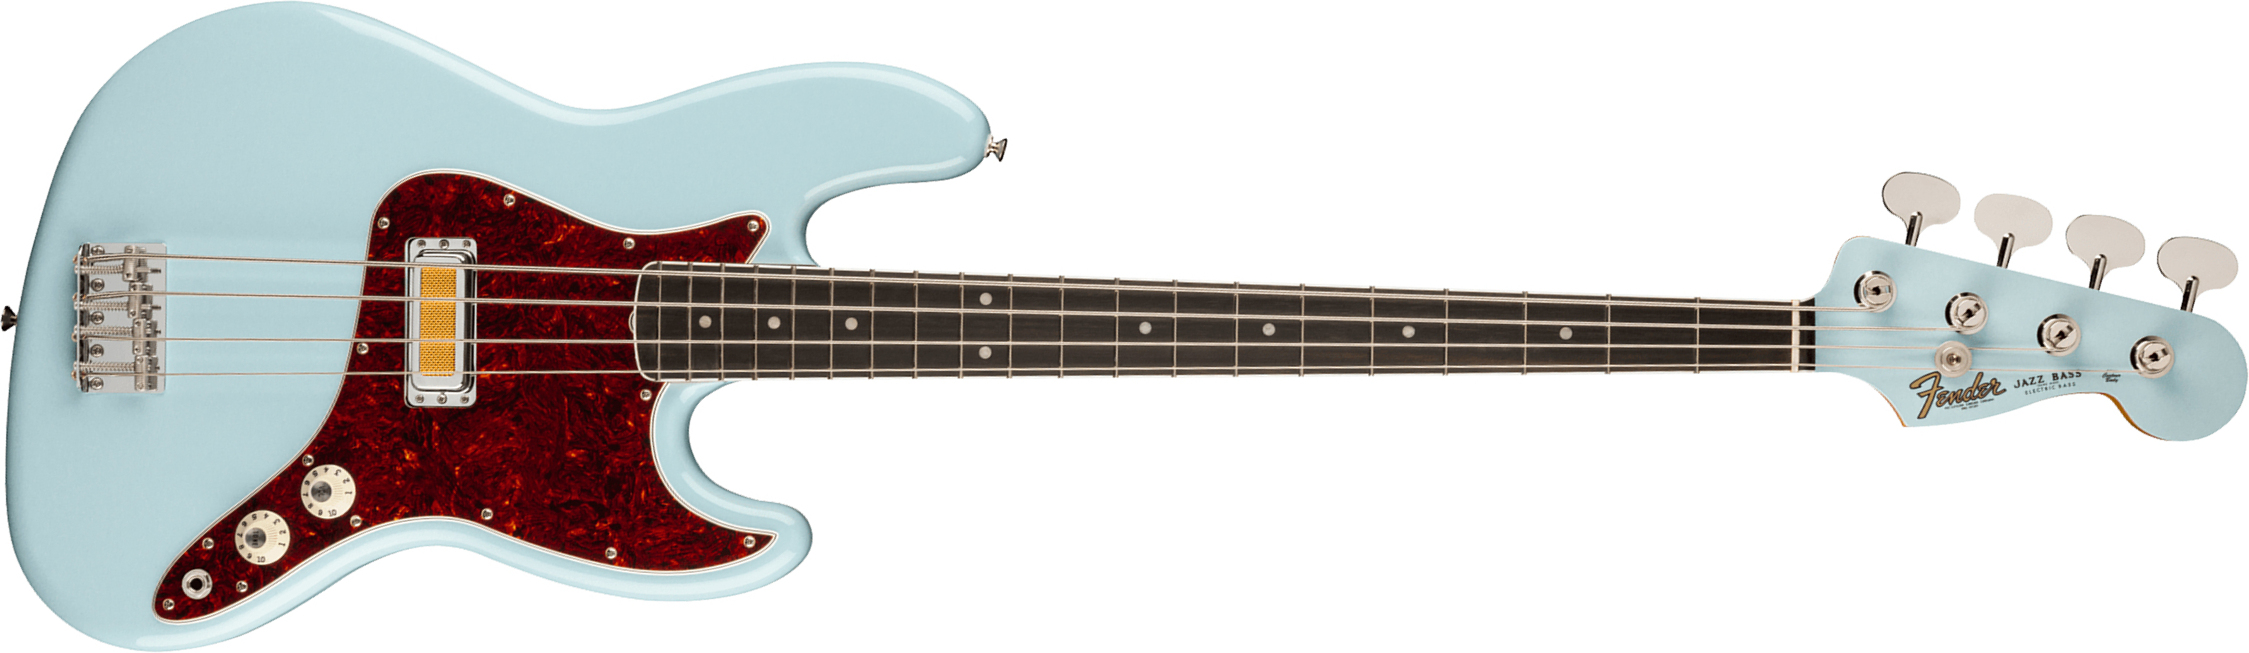 Fender Jazz Bass Gold Foil Ltd Mex Eb - Sonic Blue - Solid body electric bass - Main picture